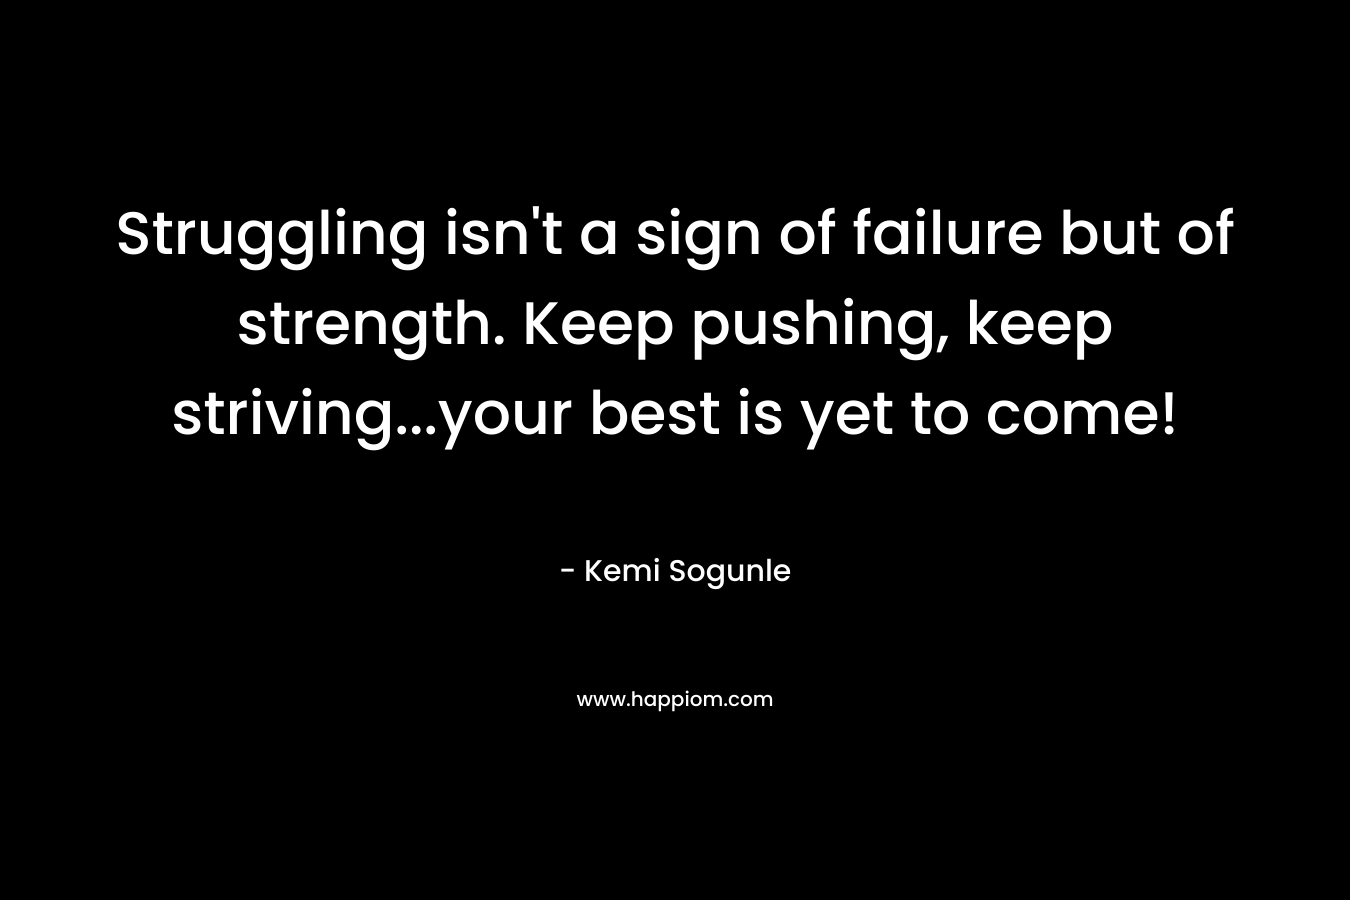 Struggling isn’t a sign of failure but of strength. Keep pushing, keep striving…your best is yet to come! – Kemi Sogunle